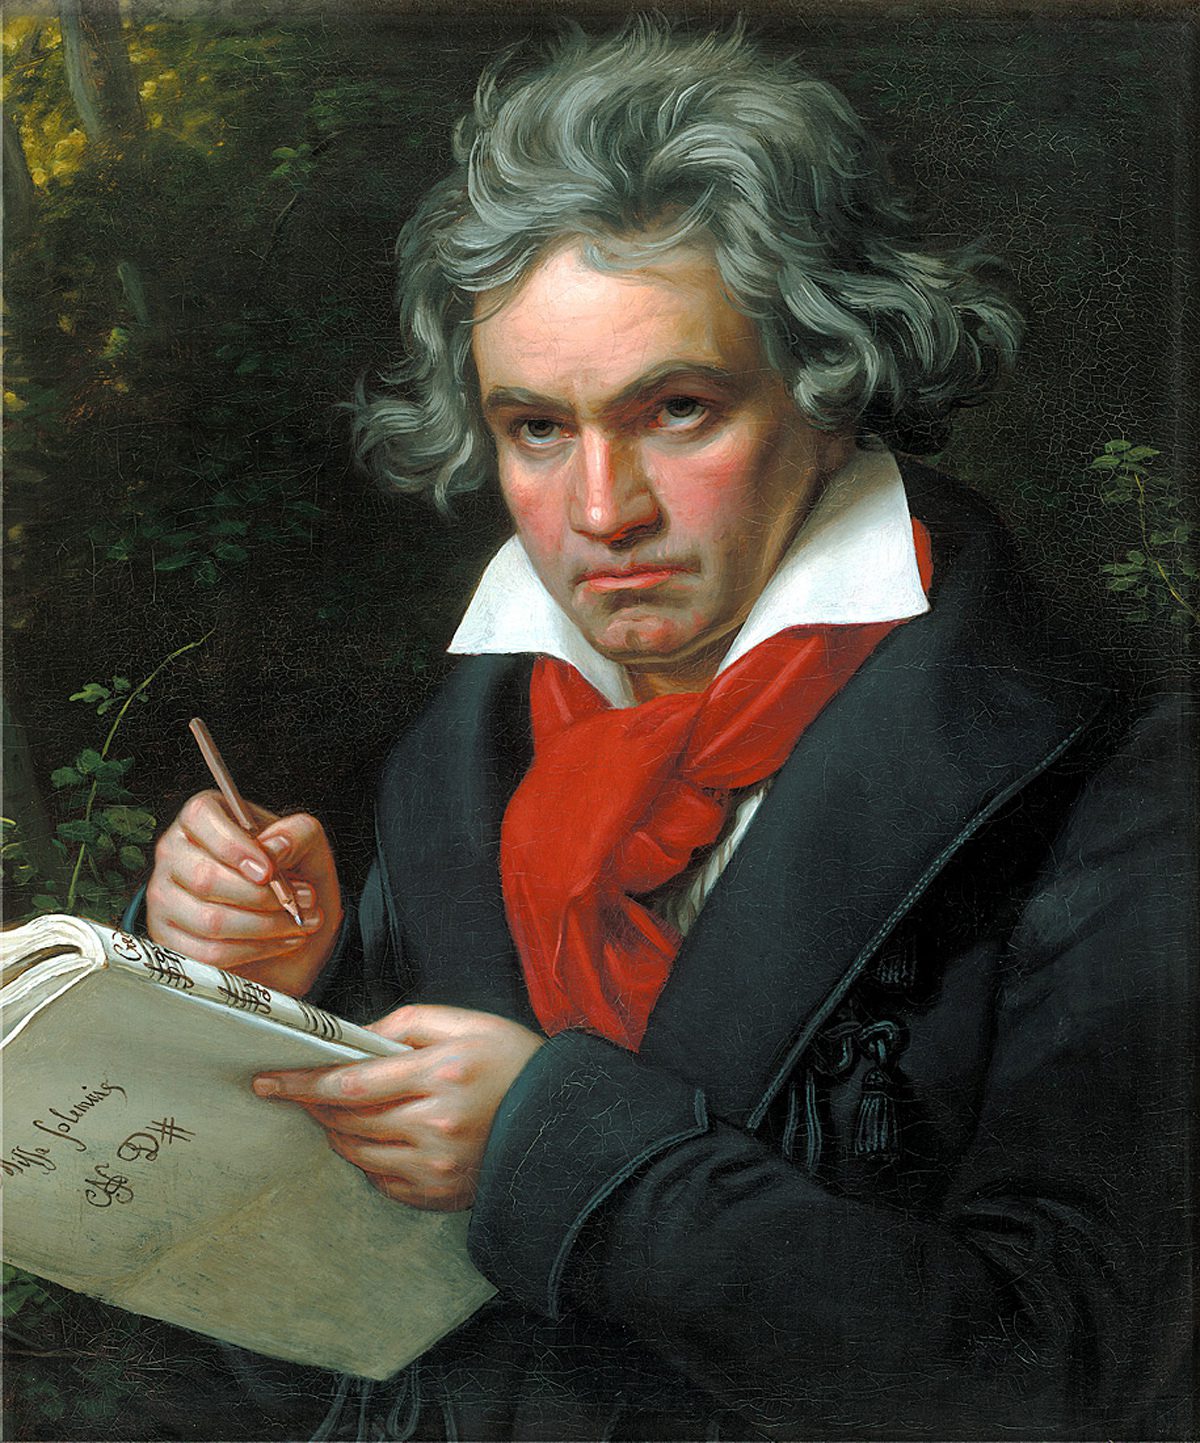 September is All About Beethoven!